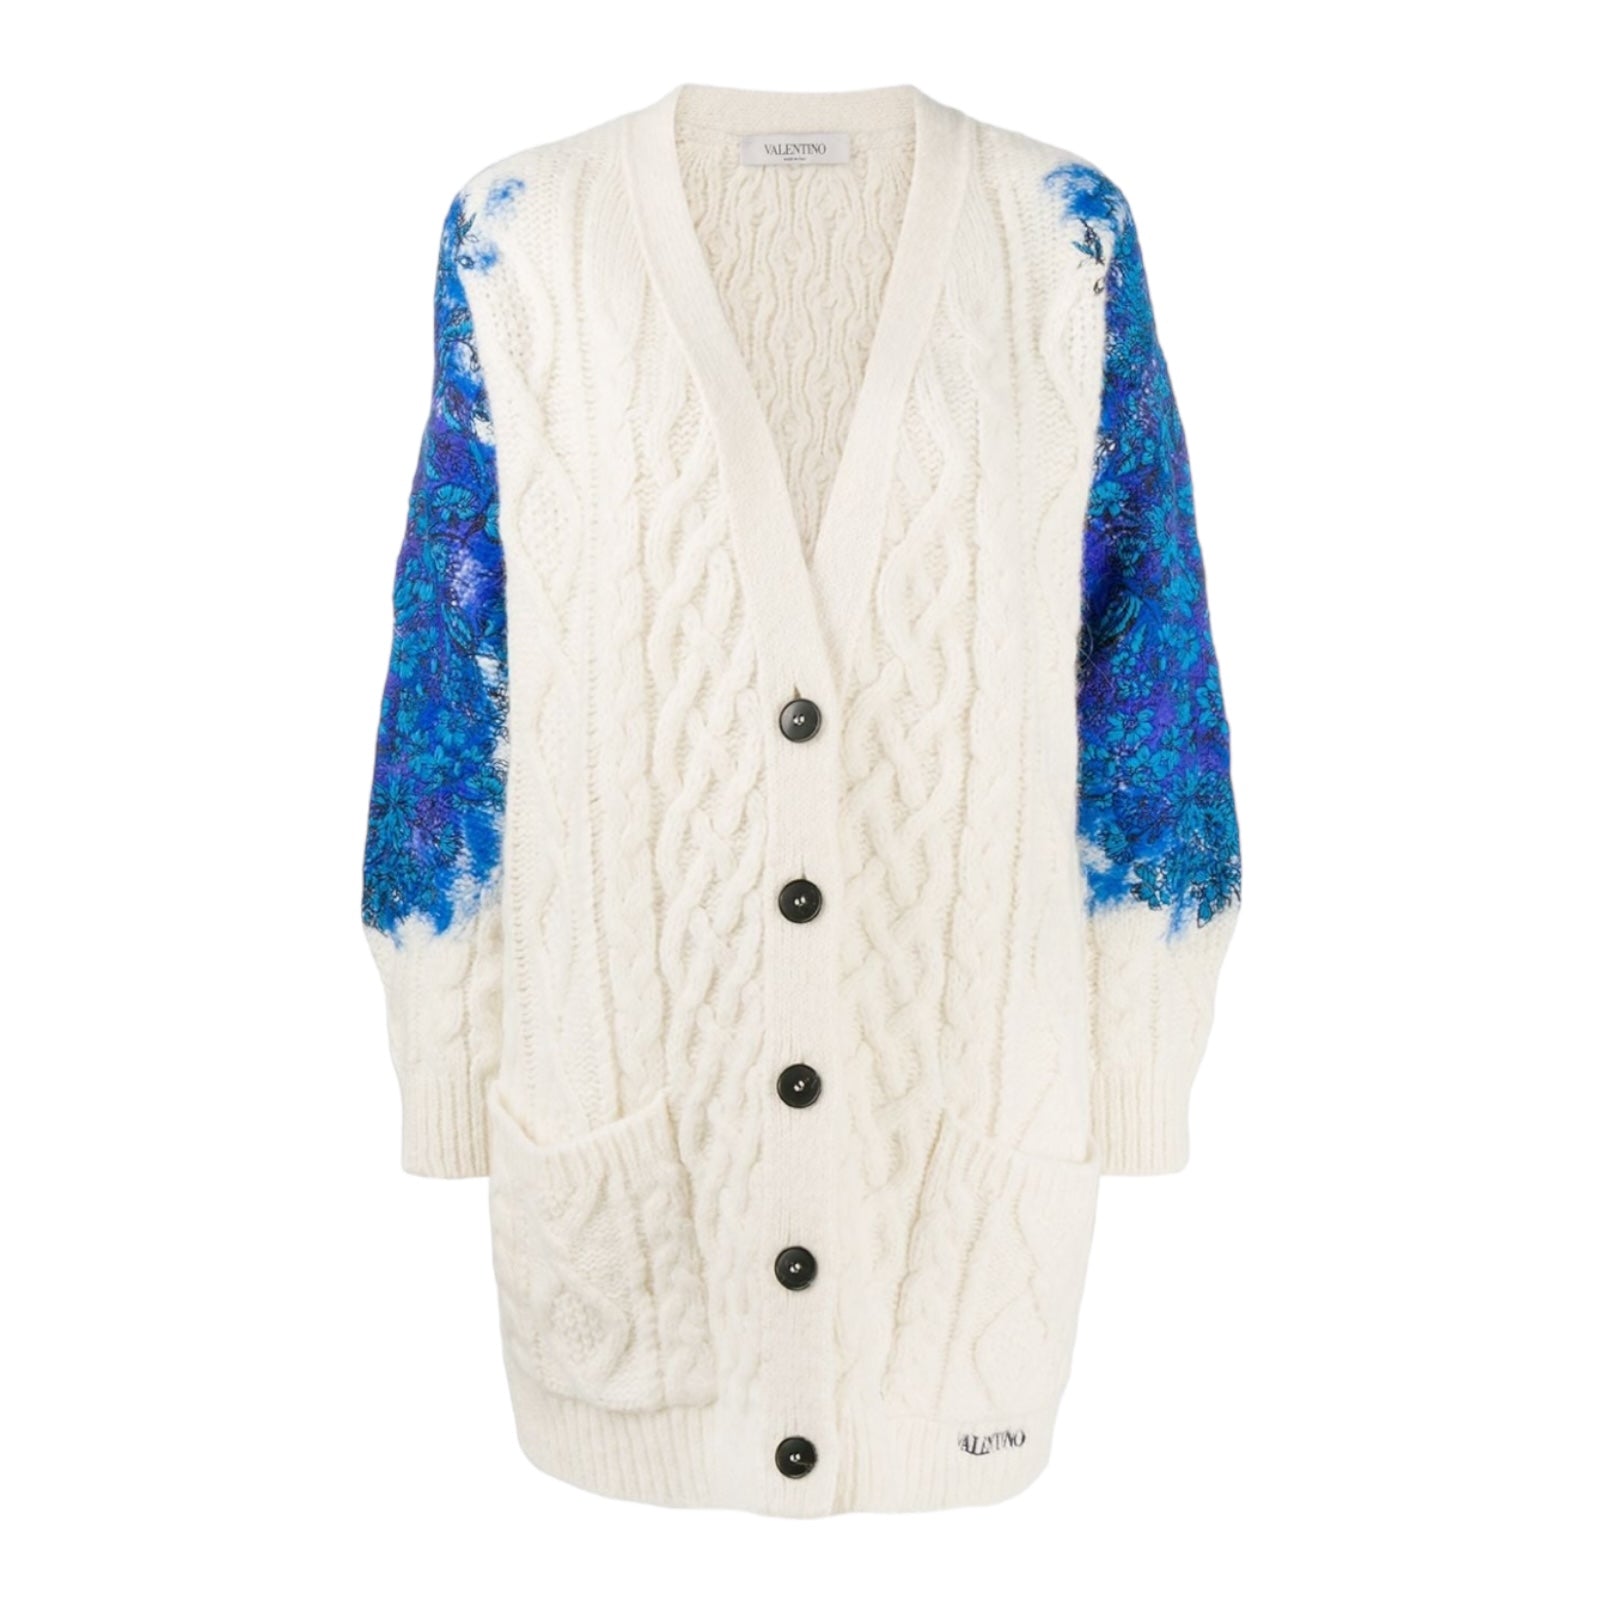 Valentino Floral Print Embroidered Long Cardigan